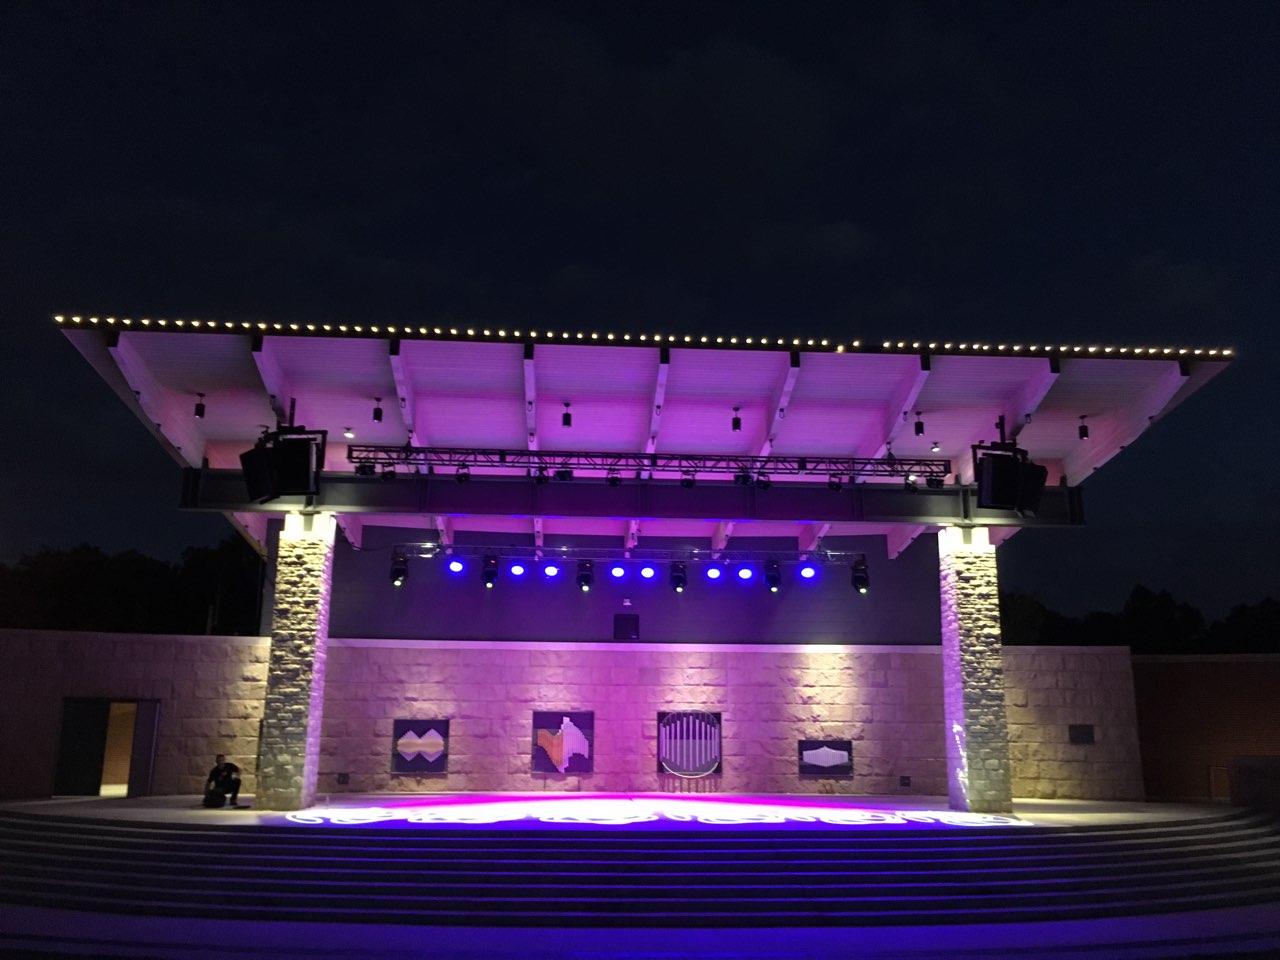 Weatherproof Elation Lighting for Federal Hill Commons Amphitheater in IndianaGallery Image federal hill commons 2 